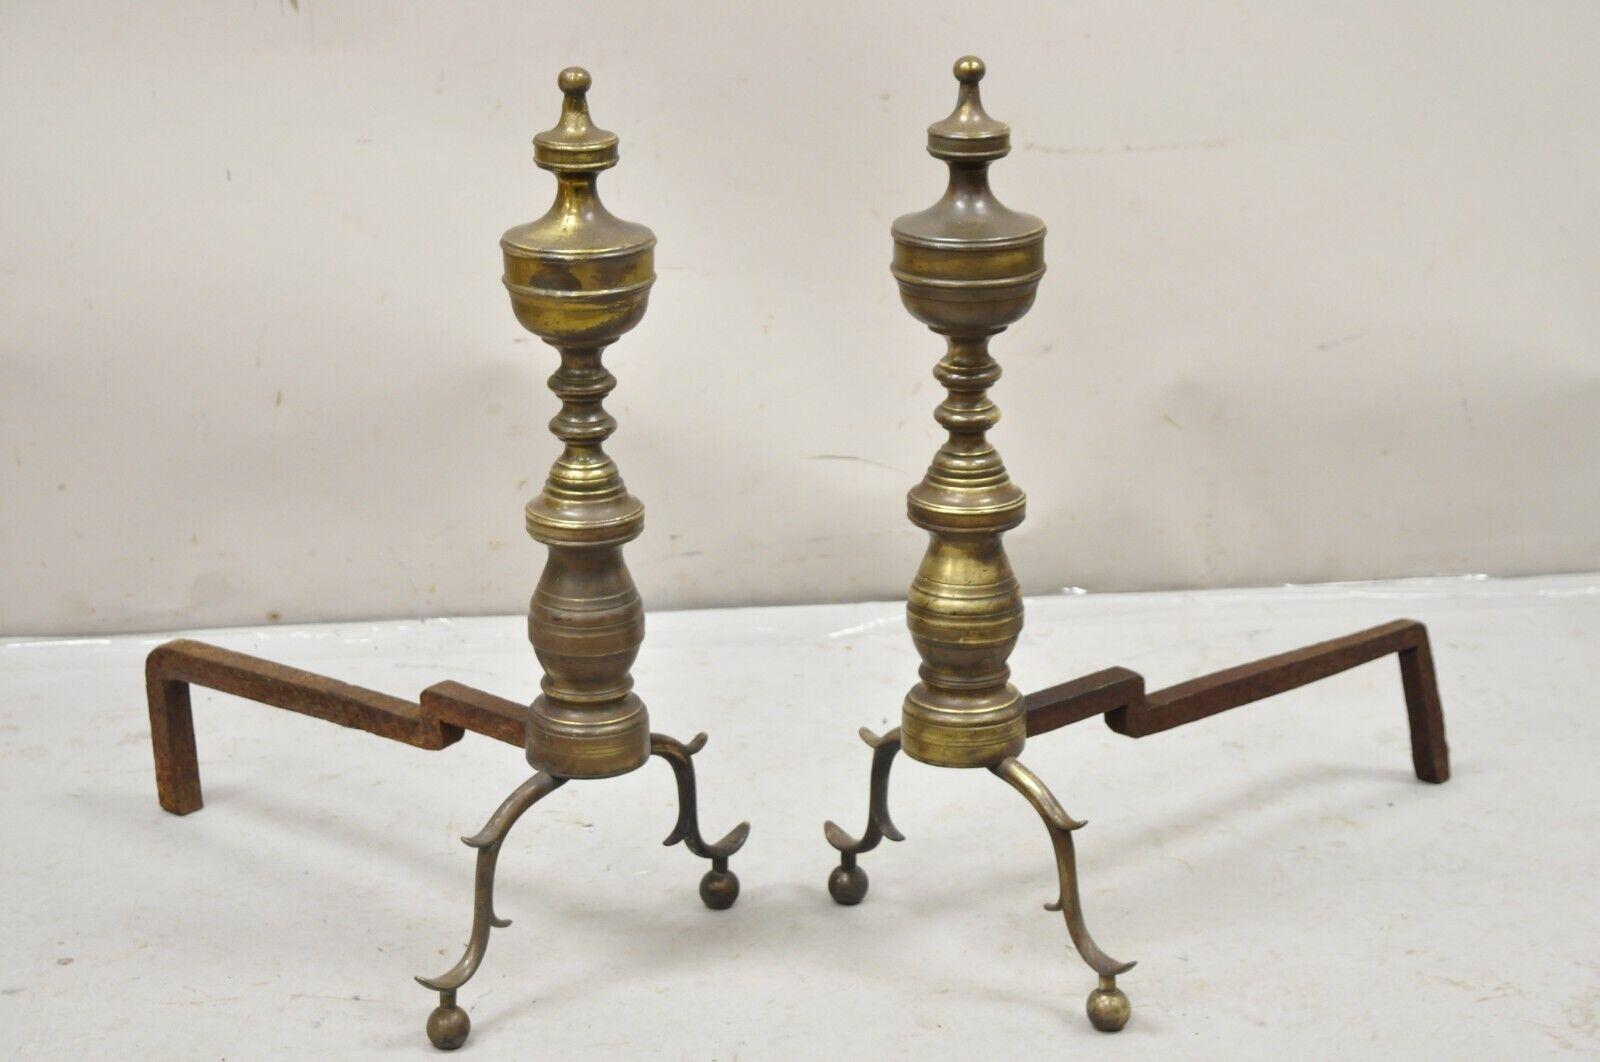 Antique Brass Federal Branch Leg Urn Finial Cast Iron Andirons - a Pair In Good Condition For Sale In Philadelphia, PA